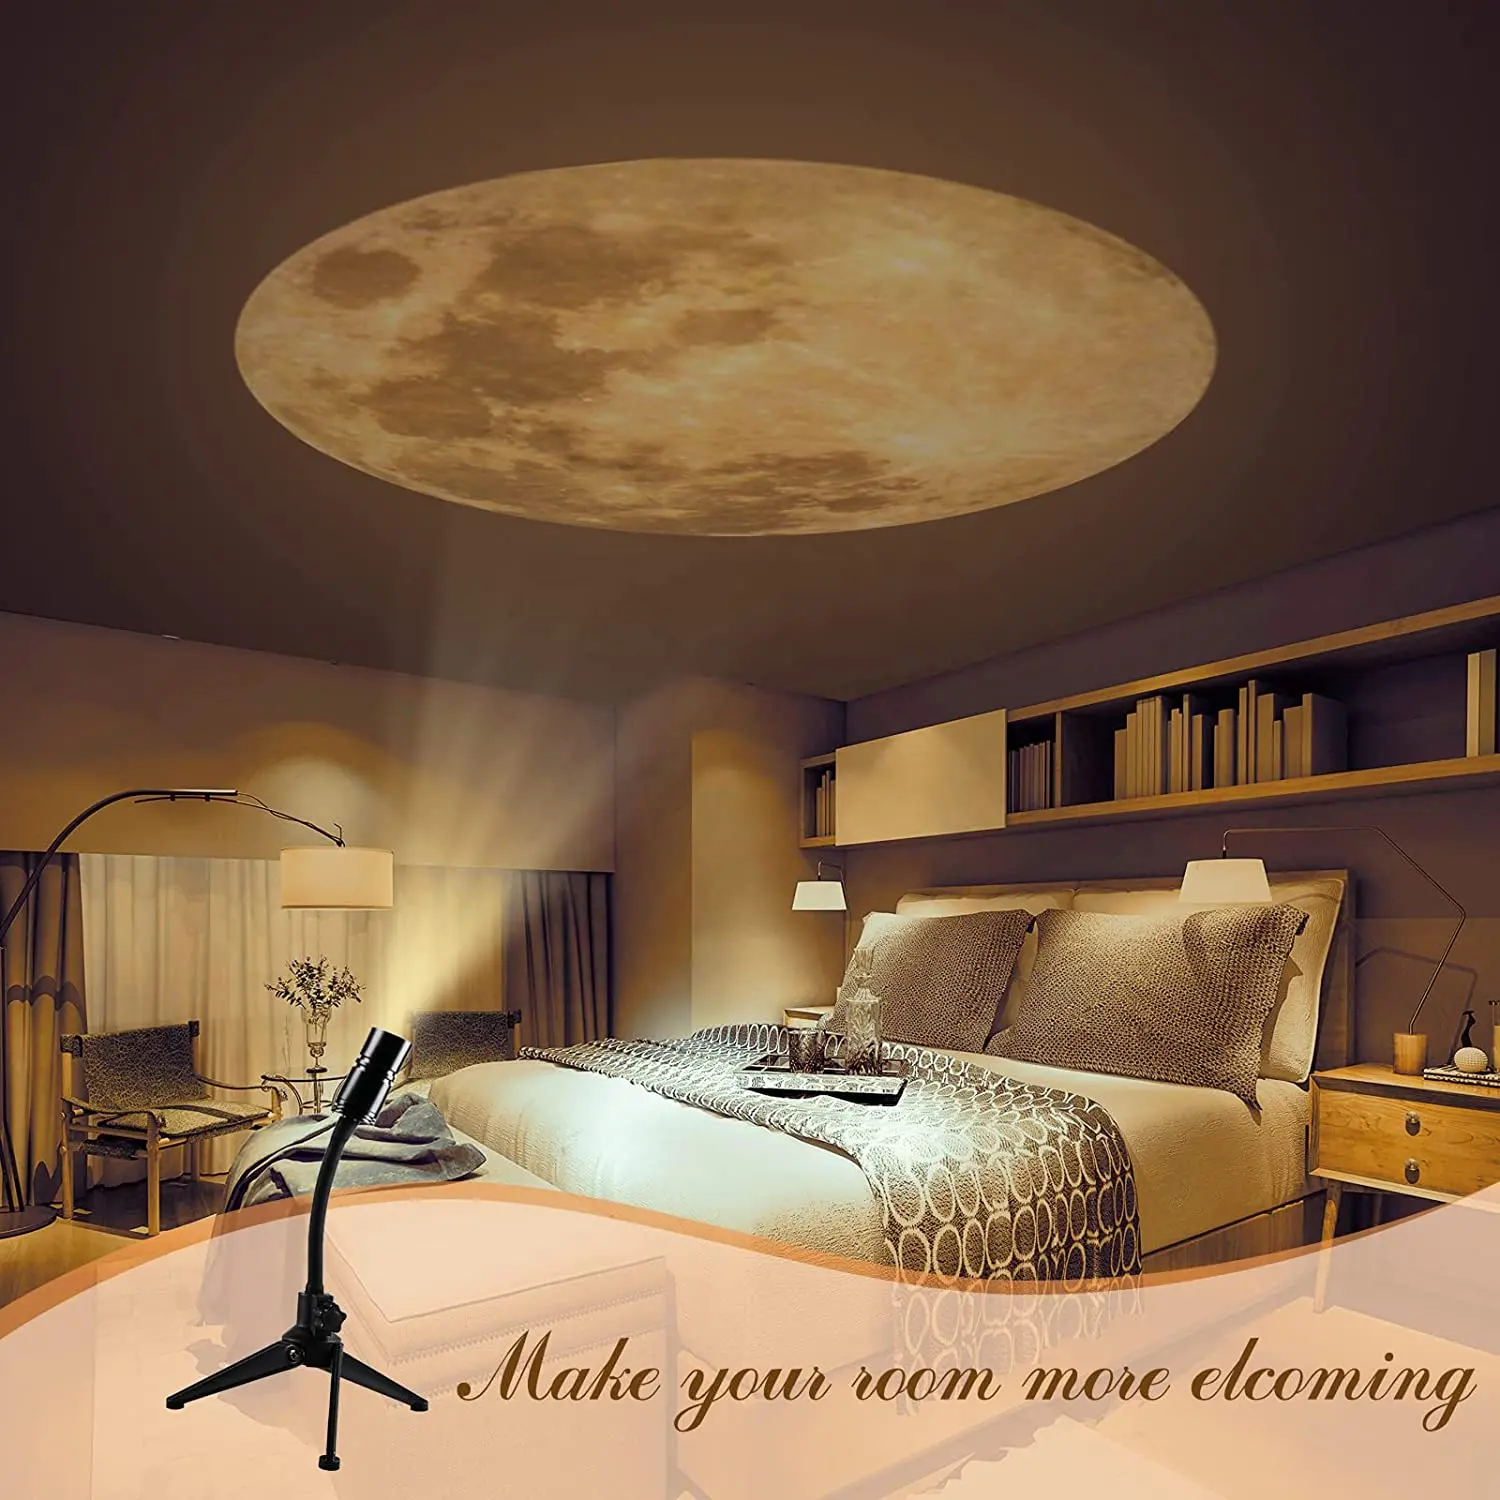 2 In 1 Earth Moon Projection Led Lamp 360 Rotatable USB Starry Sky Projector Night Light